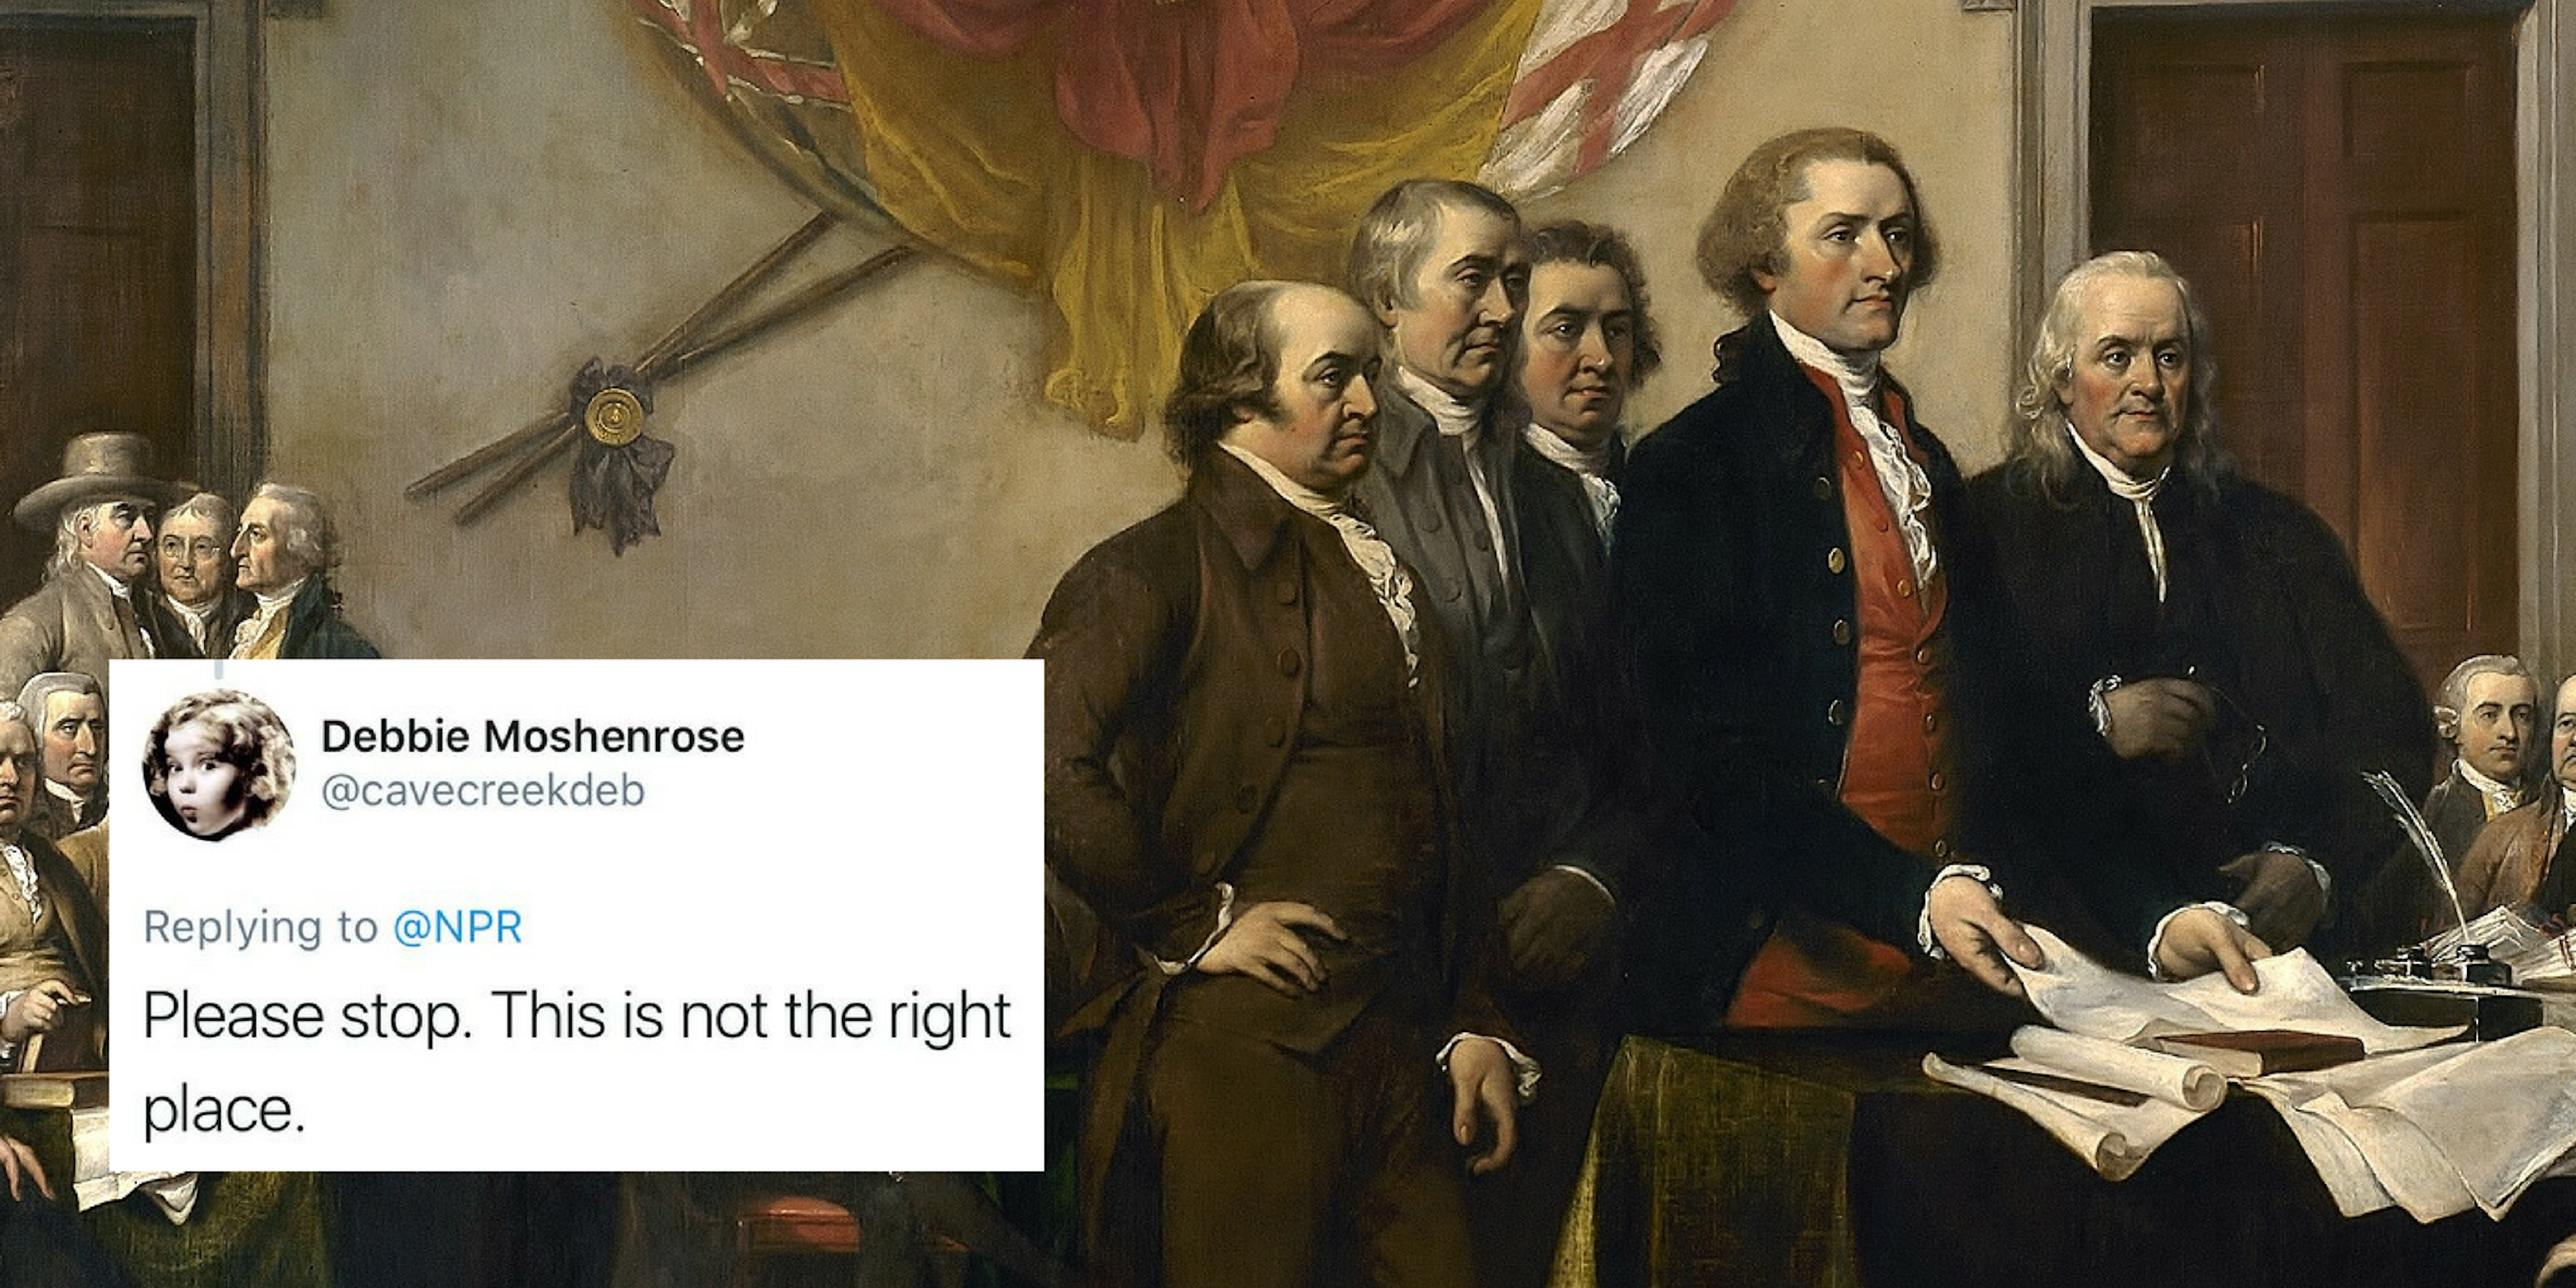 Trump supporters responding to NPR's Declaration of independence tweets